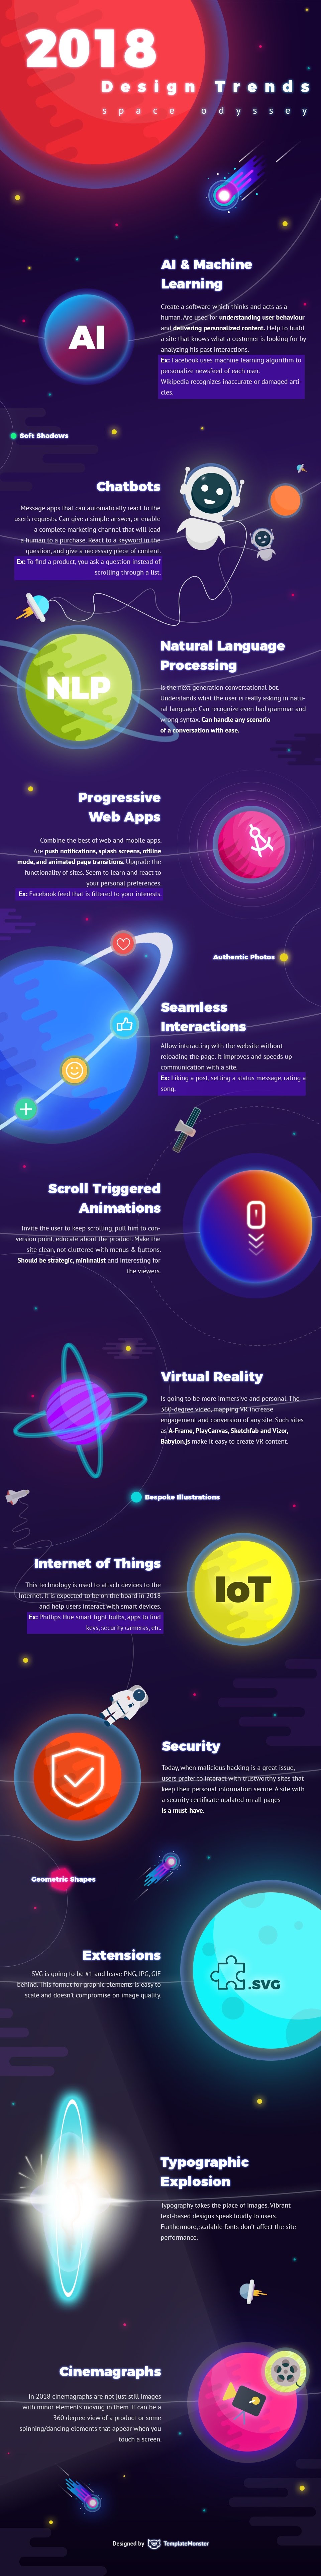 Space Odyssey to Web Design Trends 2018 [Infographic]